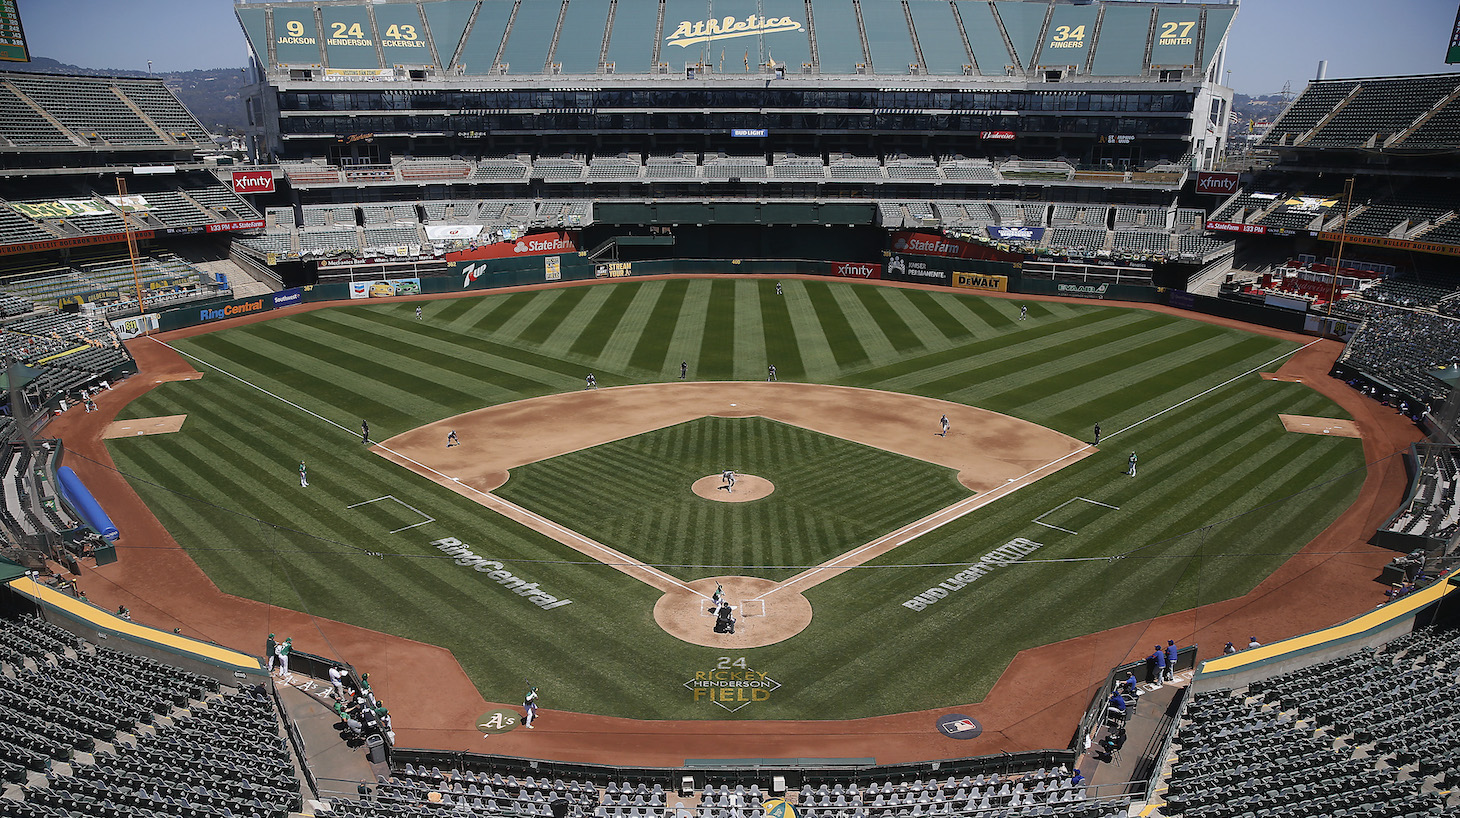 OAKLAND, CALIFORNIA - AUGUST 06: A general view of play between the Oakland Athletics and the Texas Rangers at Oakland-Alameda County Coliseum on August 06, 2020 in Oakland, California. (Photo by Lachlan Cunningham/Getty Images)